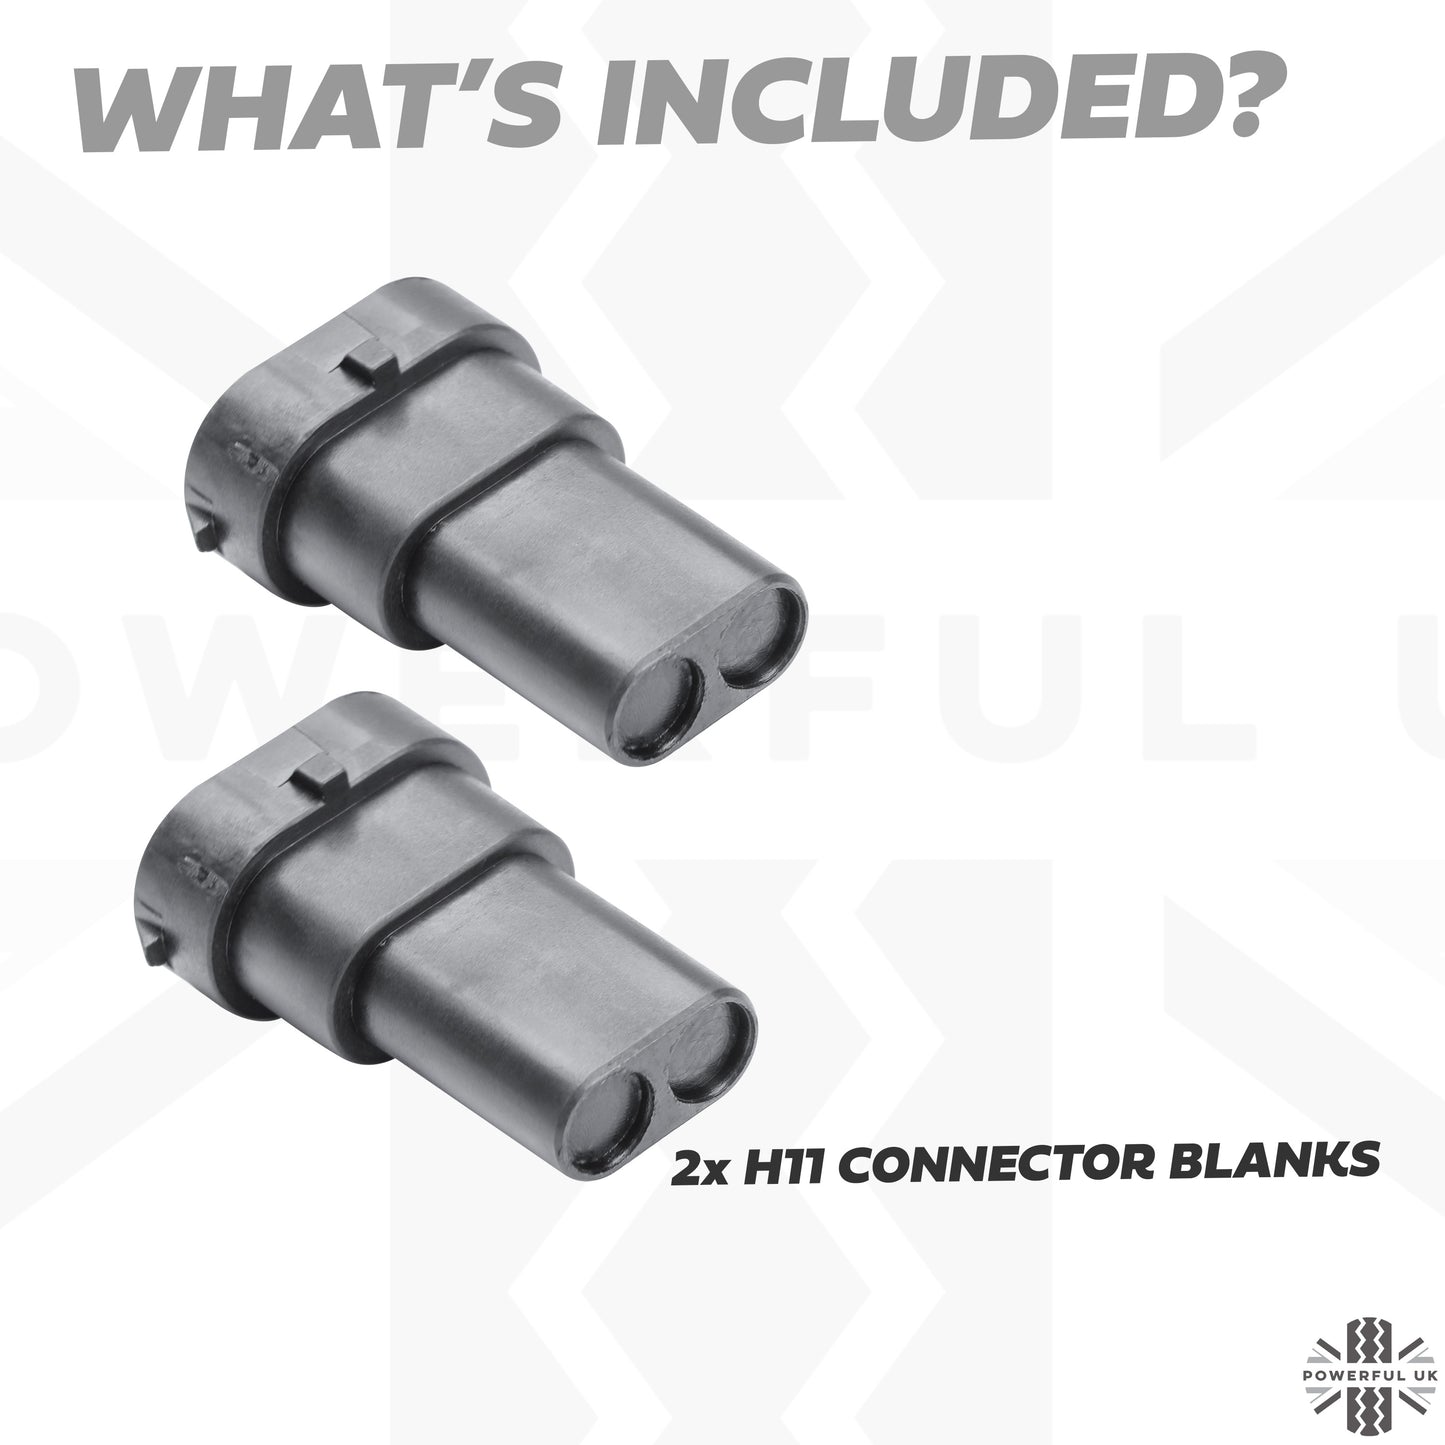 2x H11 Connector Blanks